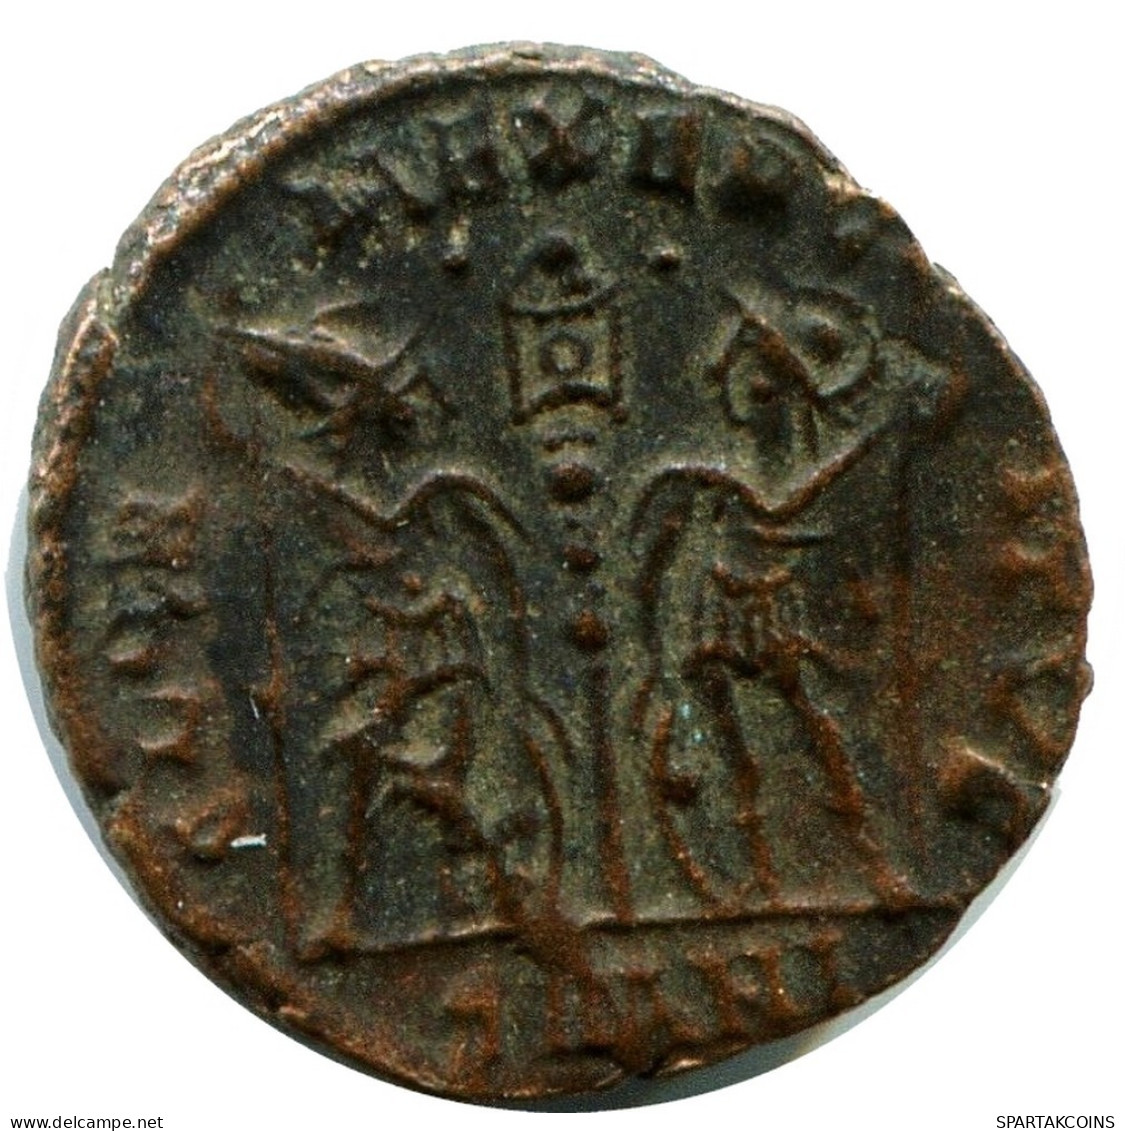 CONSTANS MINTED IN ANTIOCH FROM THE ROYAL ONTARIO MUSEUM #ANC11840.14.D.A - El Imperio Christiano (307 / 363)